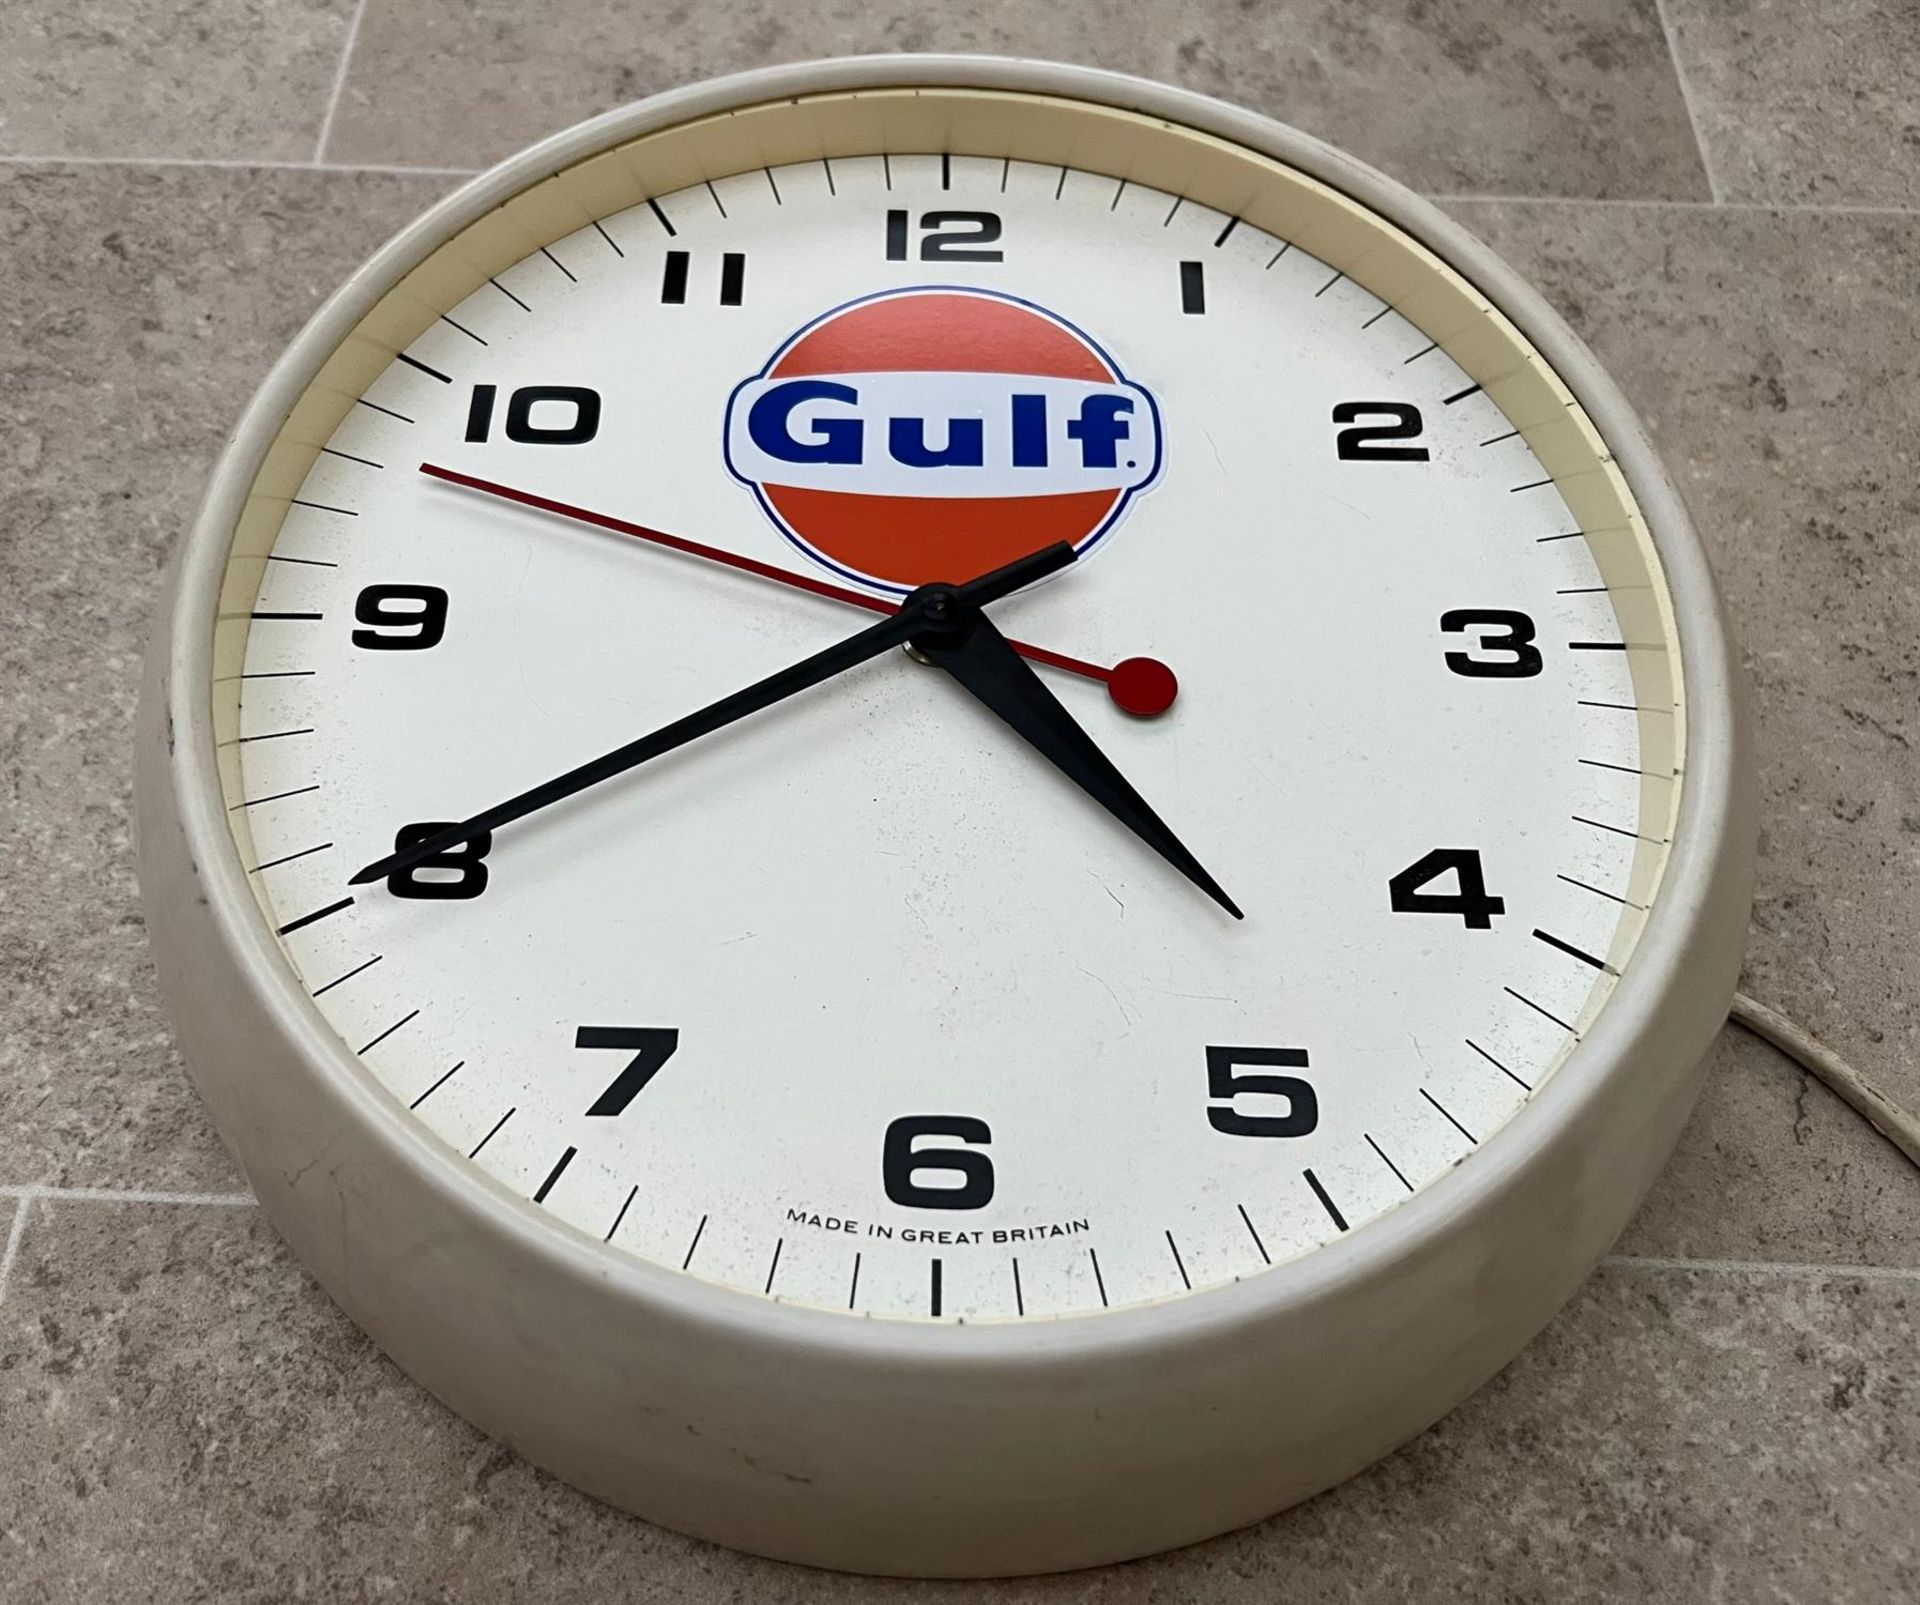 An Original Smiths 9" Gulf-Themed Wall Clock c.1970s - Image 4 of 8